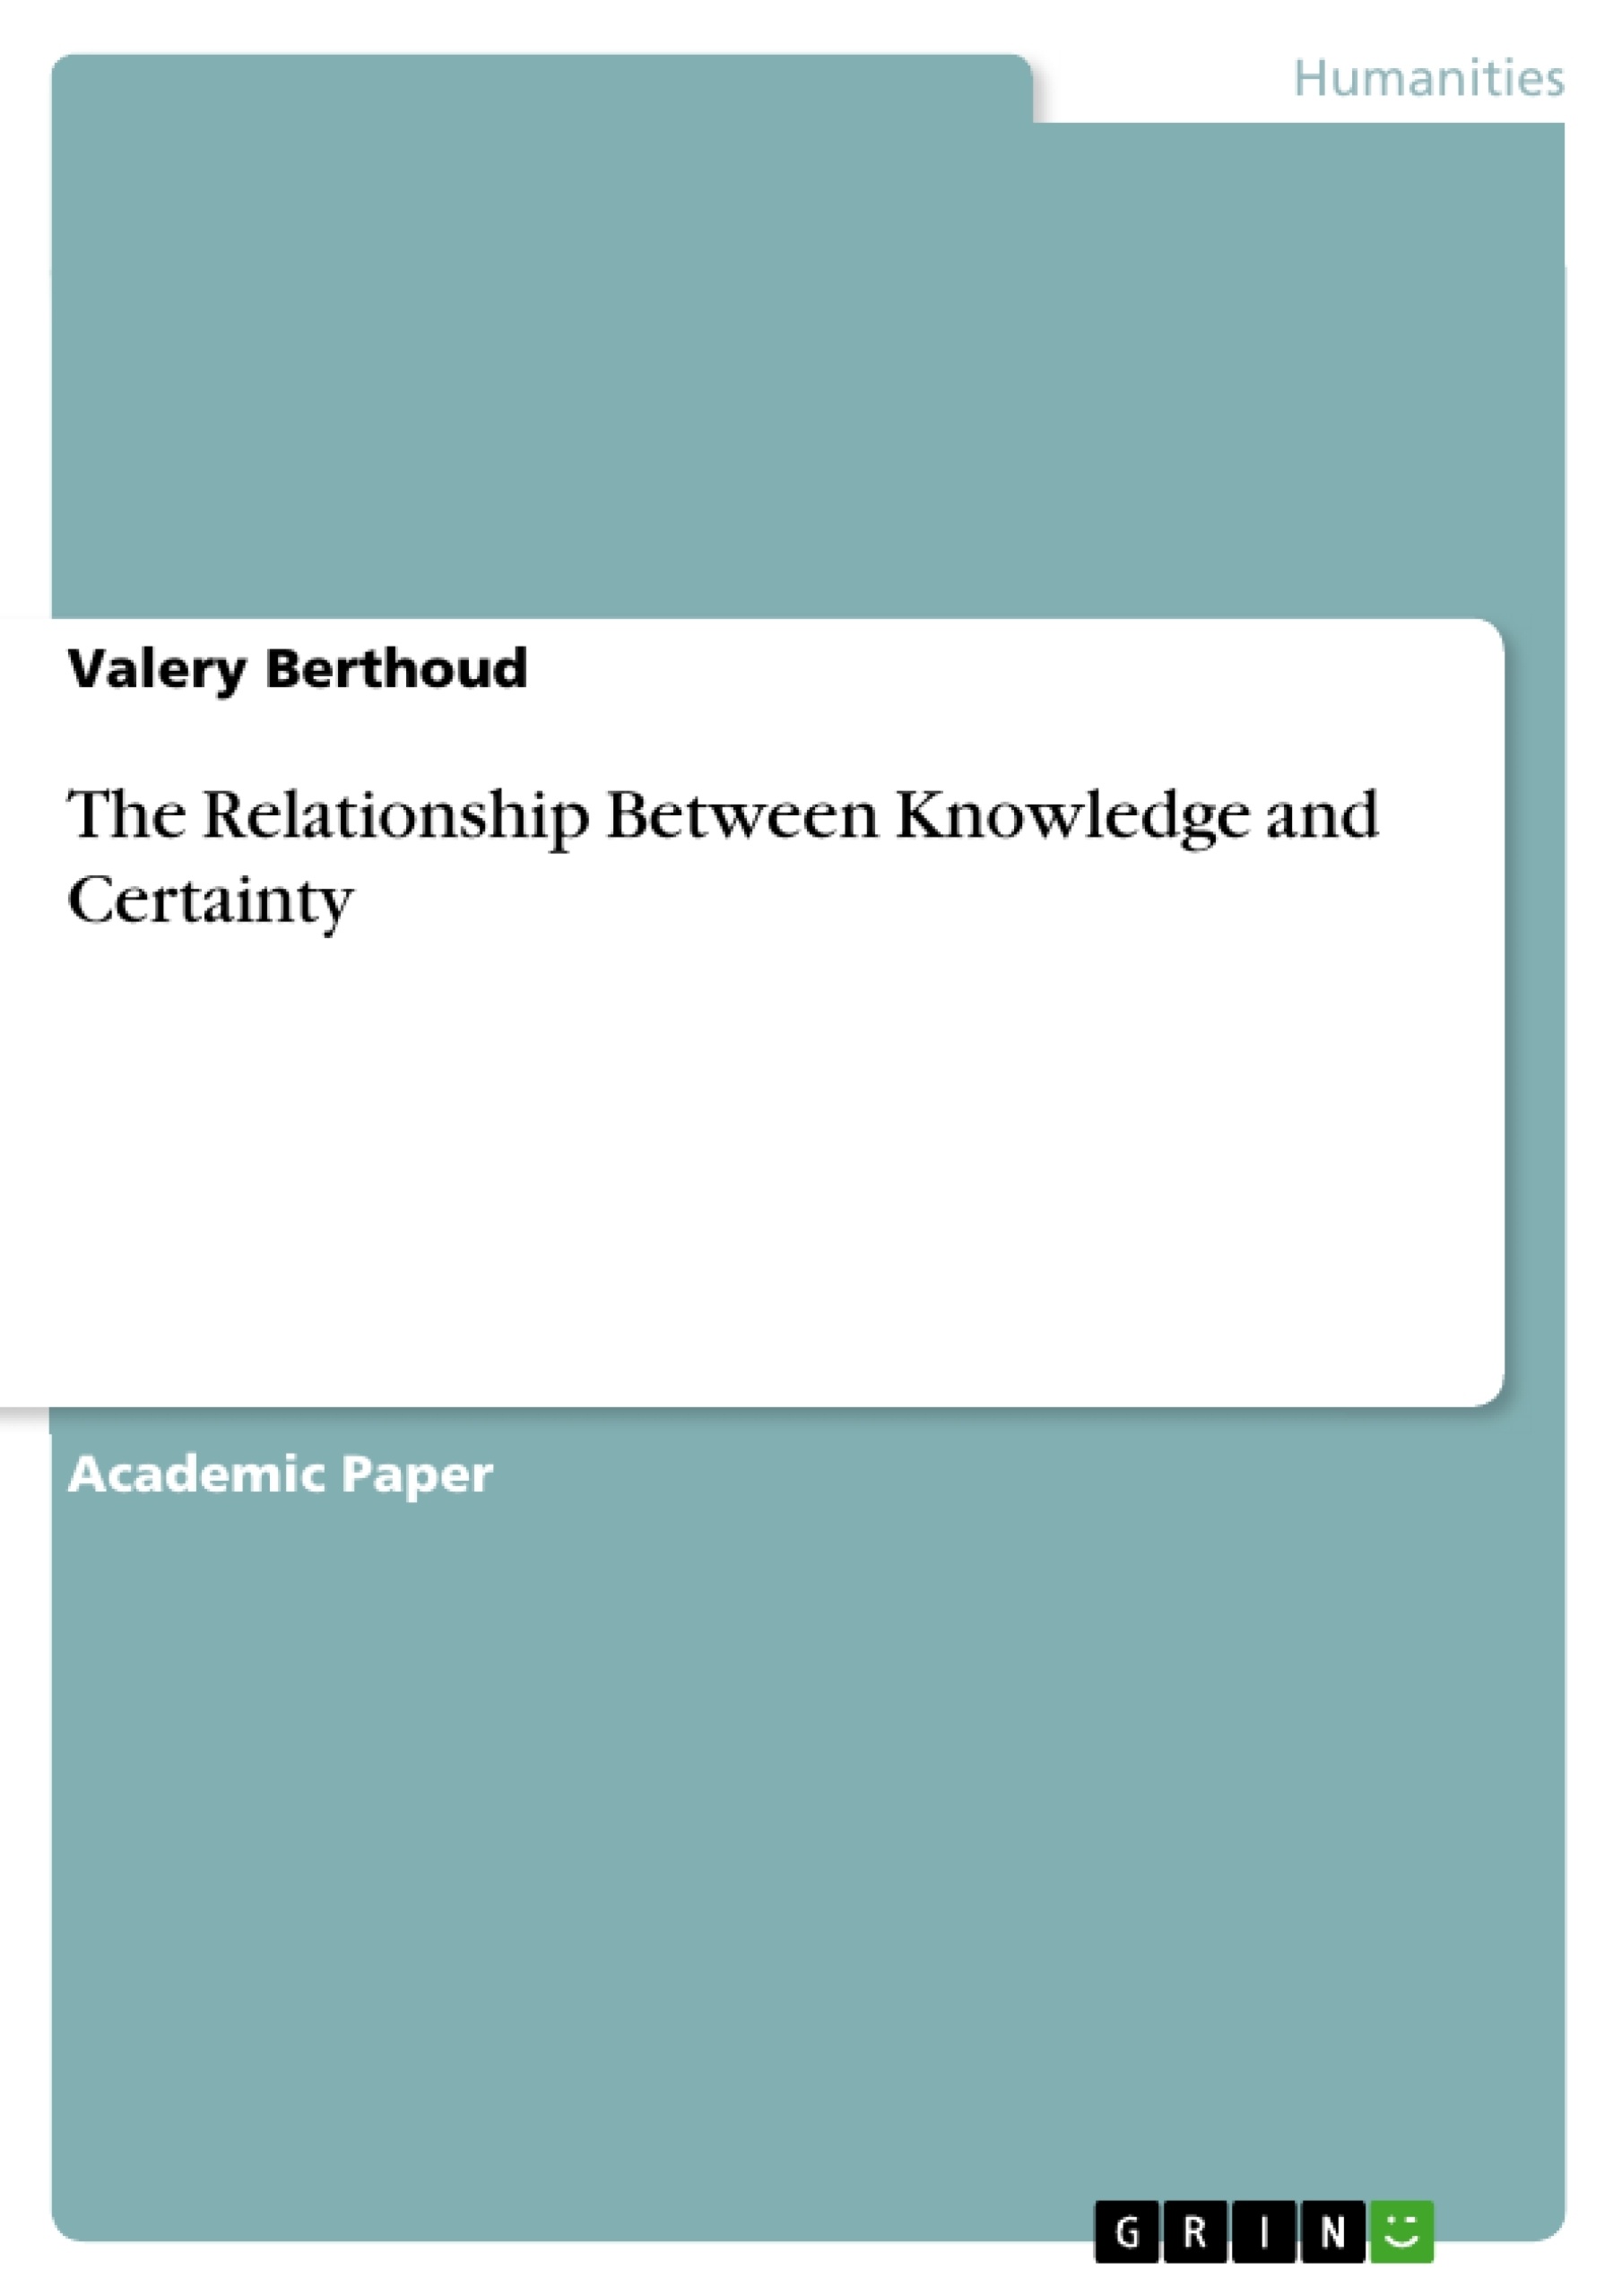 Título: The Relationship Between Knowledge and Certainty